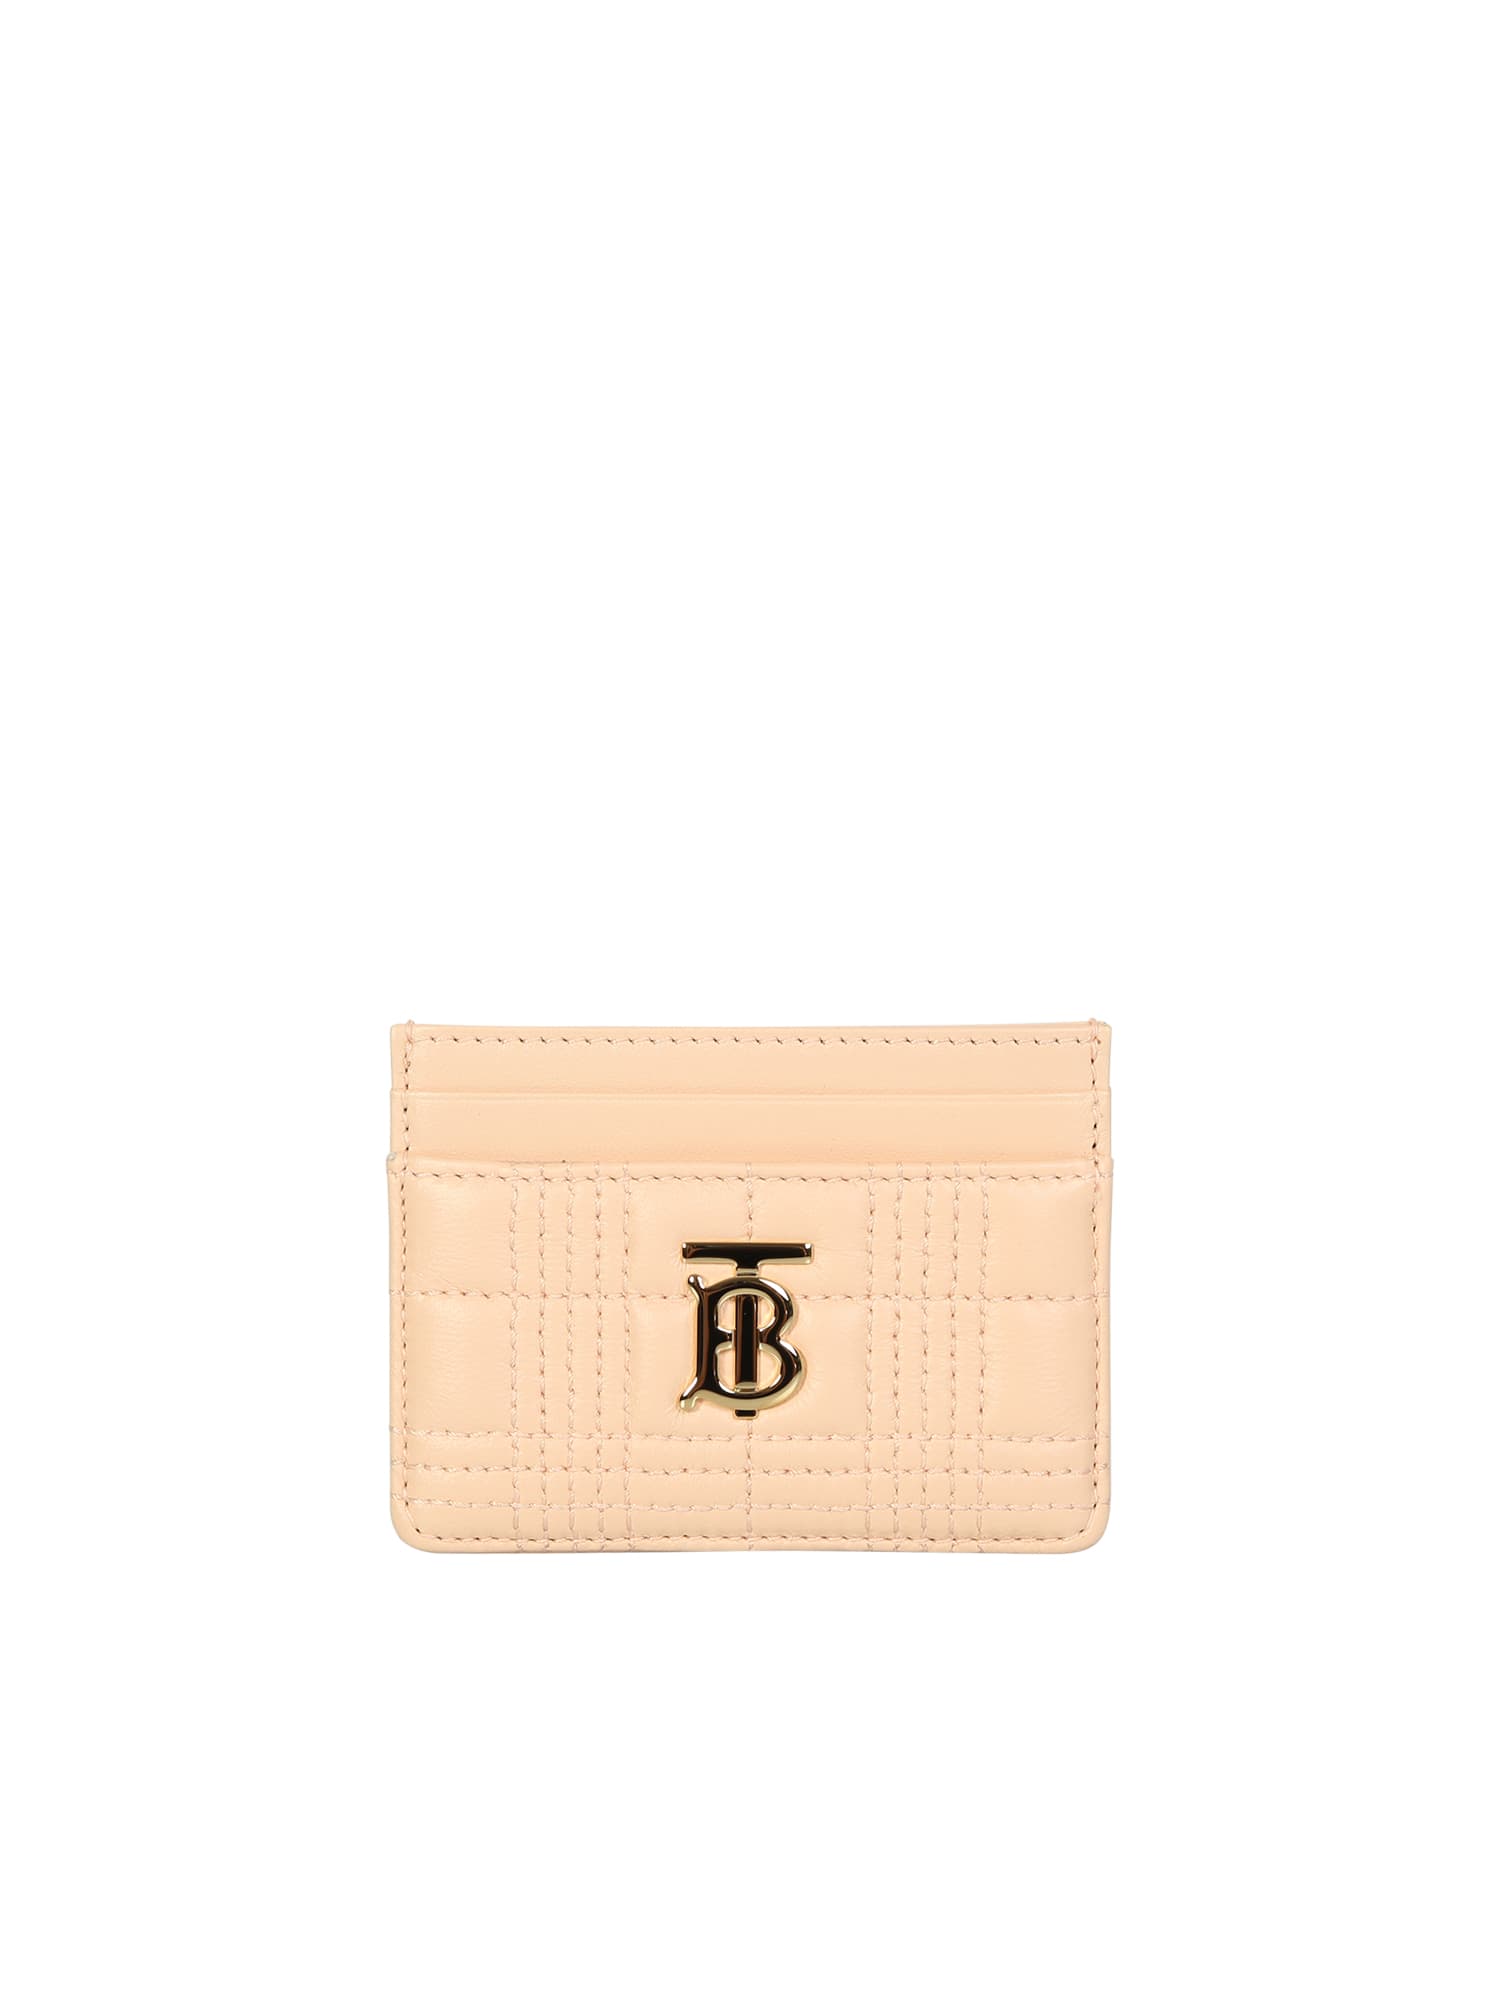 Lola Cardholder Signed Burberry, Boasts The Iconic Tb Detail In Gold-colored Plate Making It Unique And Captivating